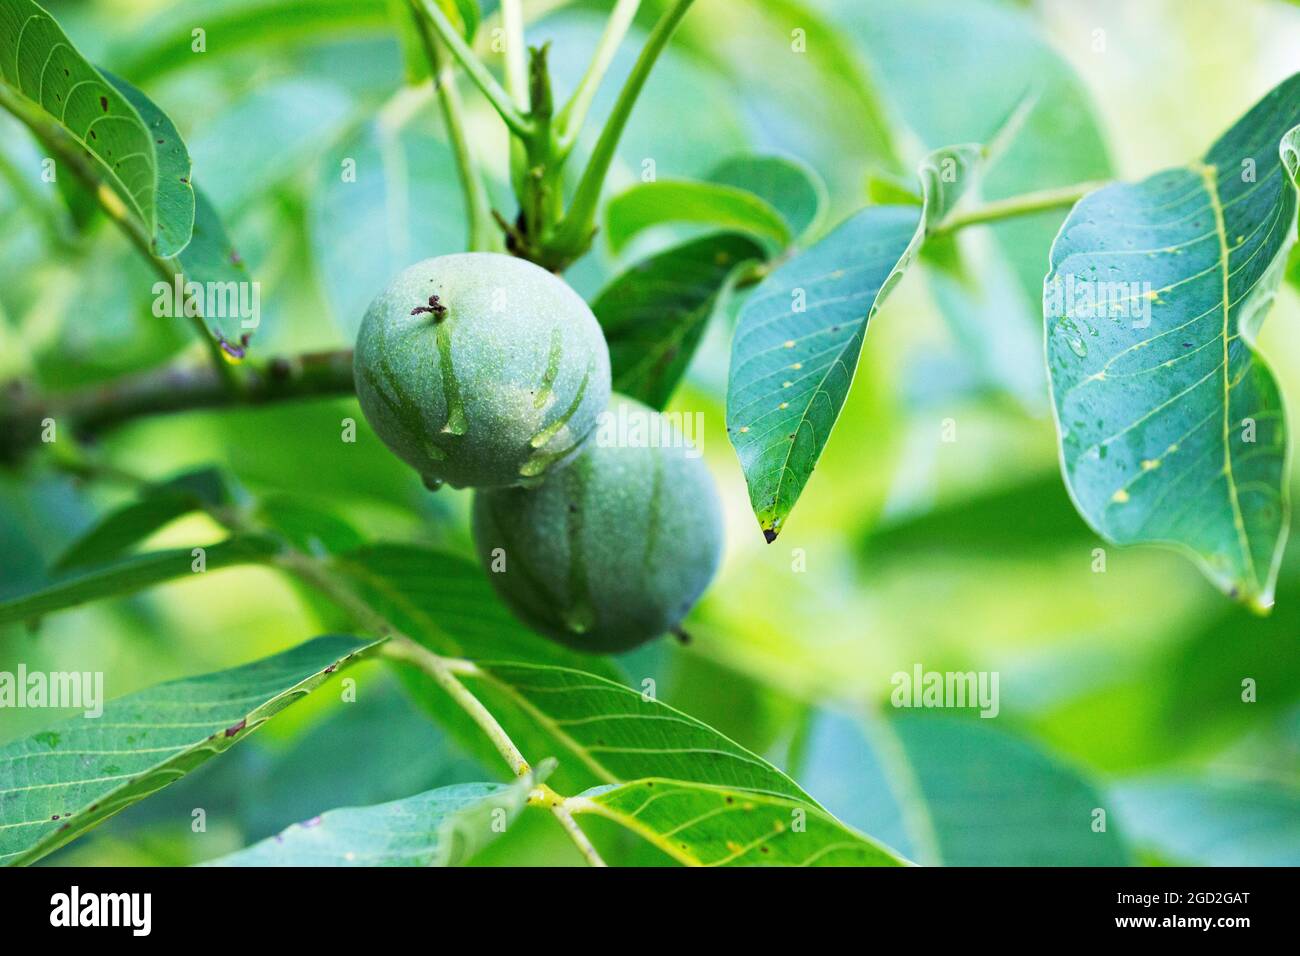 Walnuts in a green shell and leaves on a branch. Stock Photo